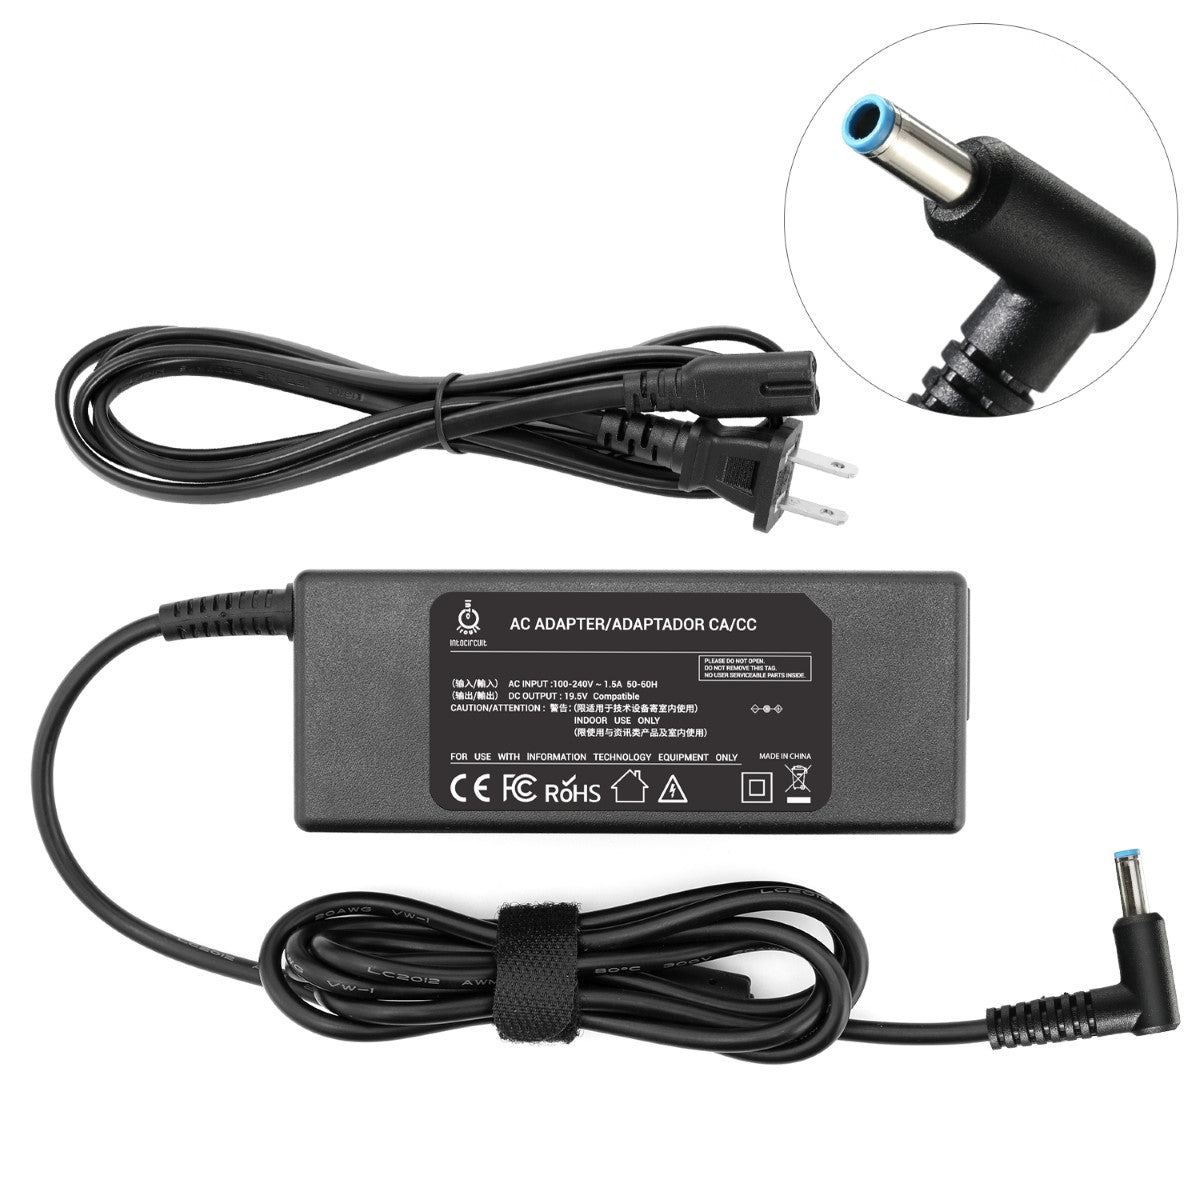 Charger for HP 15-ch012nr Spectre x360 Laptop